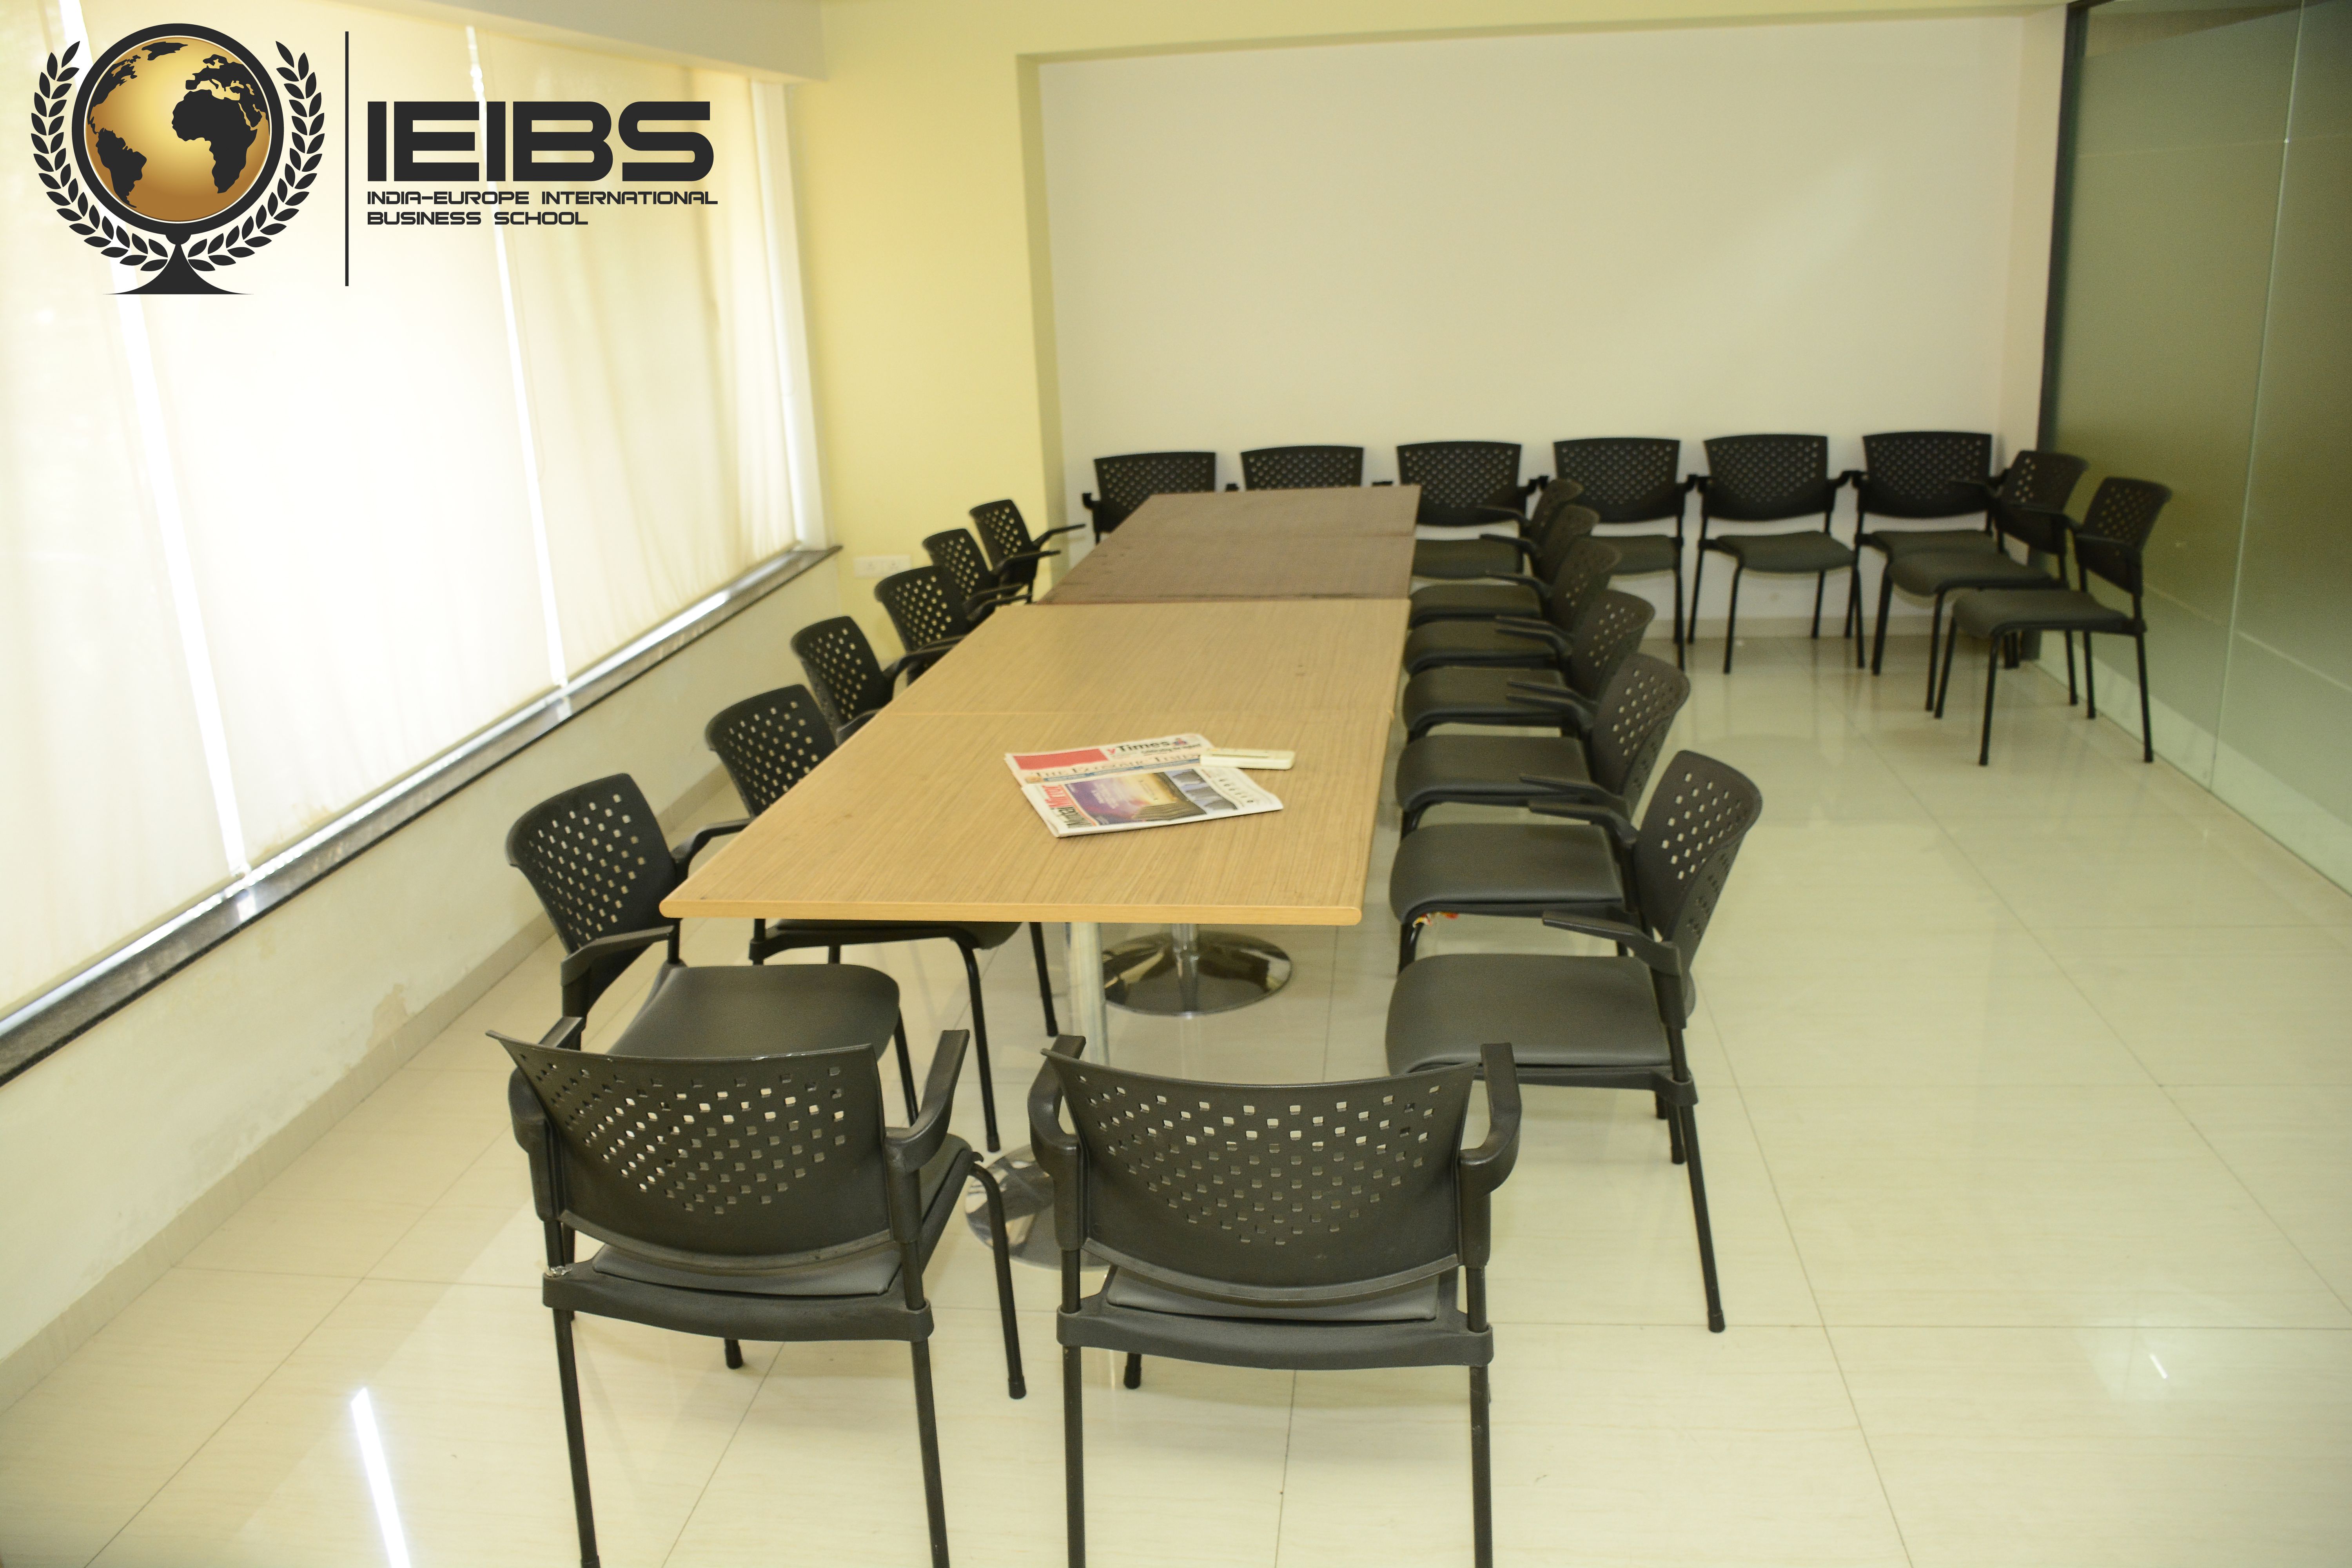 Lecture-room3-ieibs-1